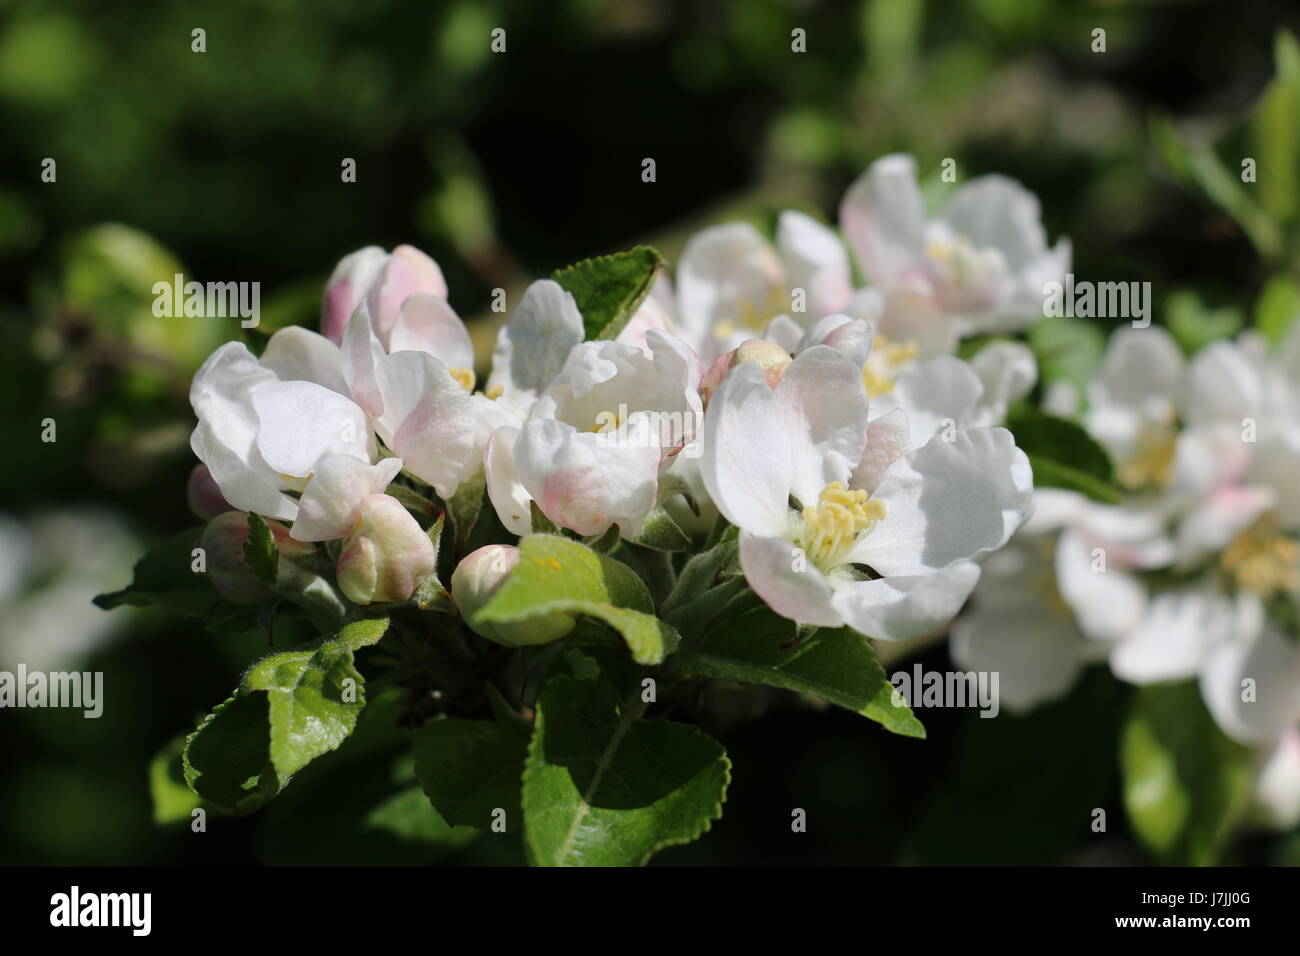 Cluster of white and pink Discovery Apple Blossom flowers blooming in the Spring sunshine in Shropshire, England Stock Photo